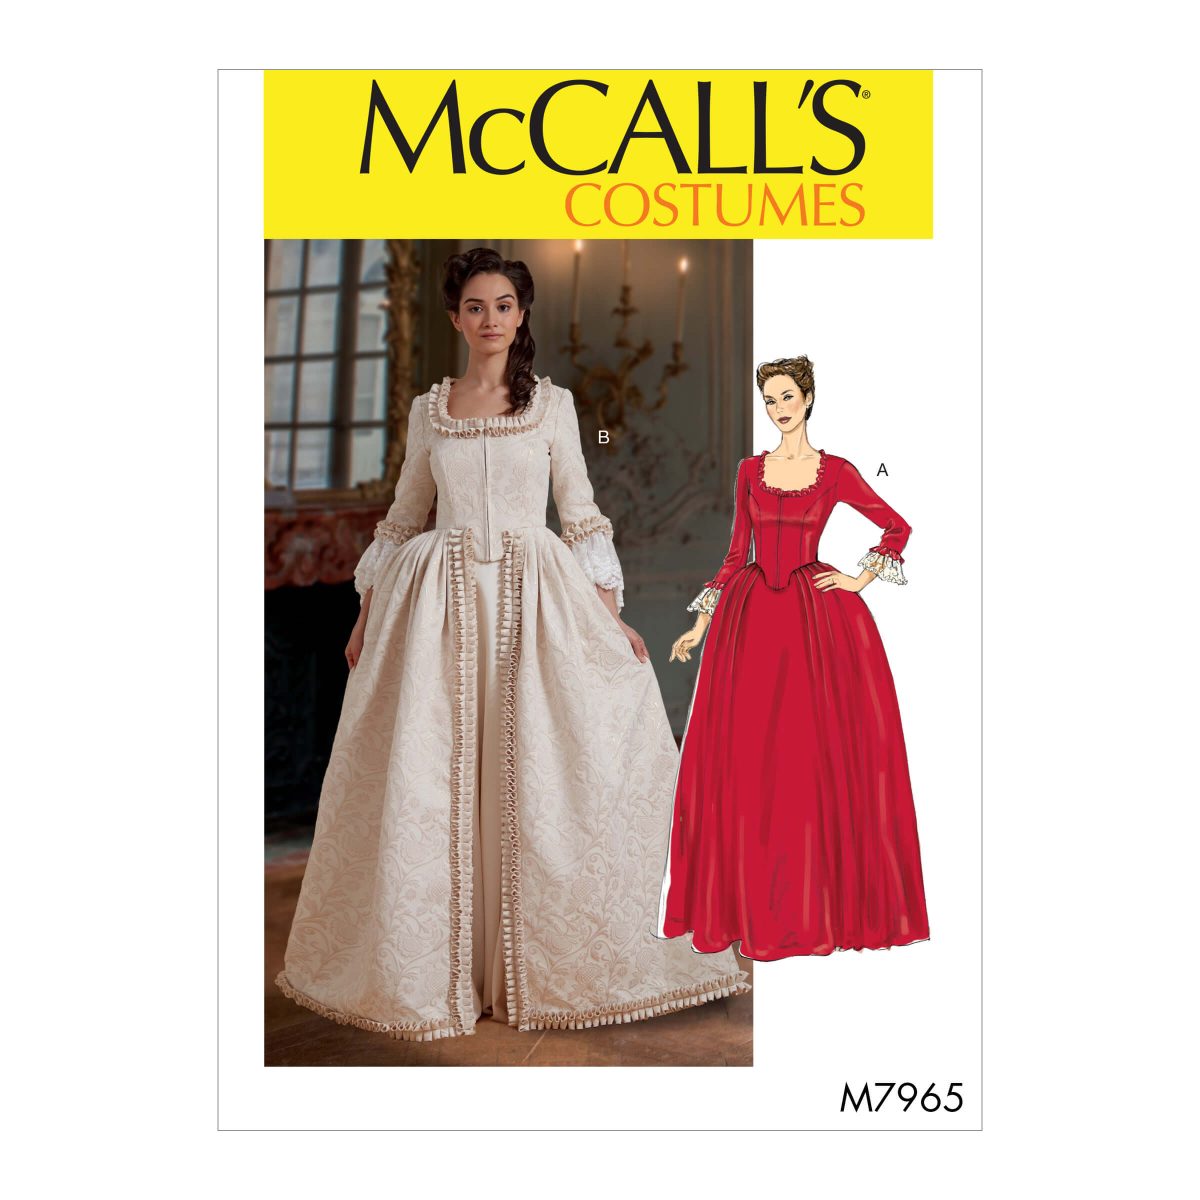 McCall's Sewing Pattern M7965 Misses' Costume